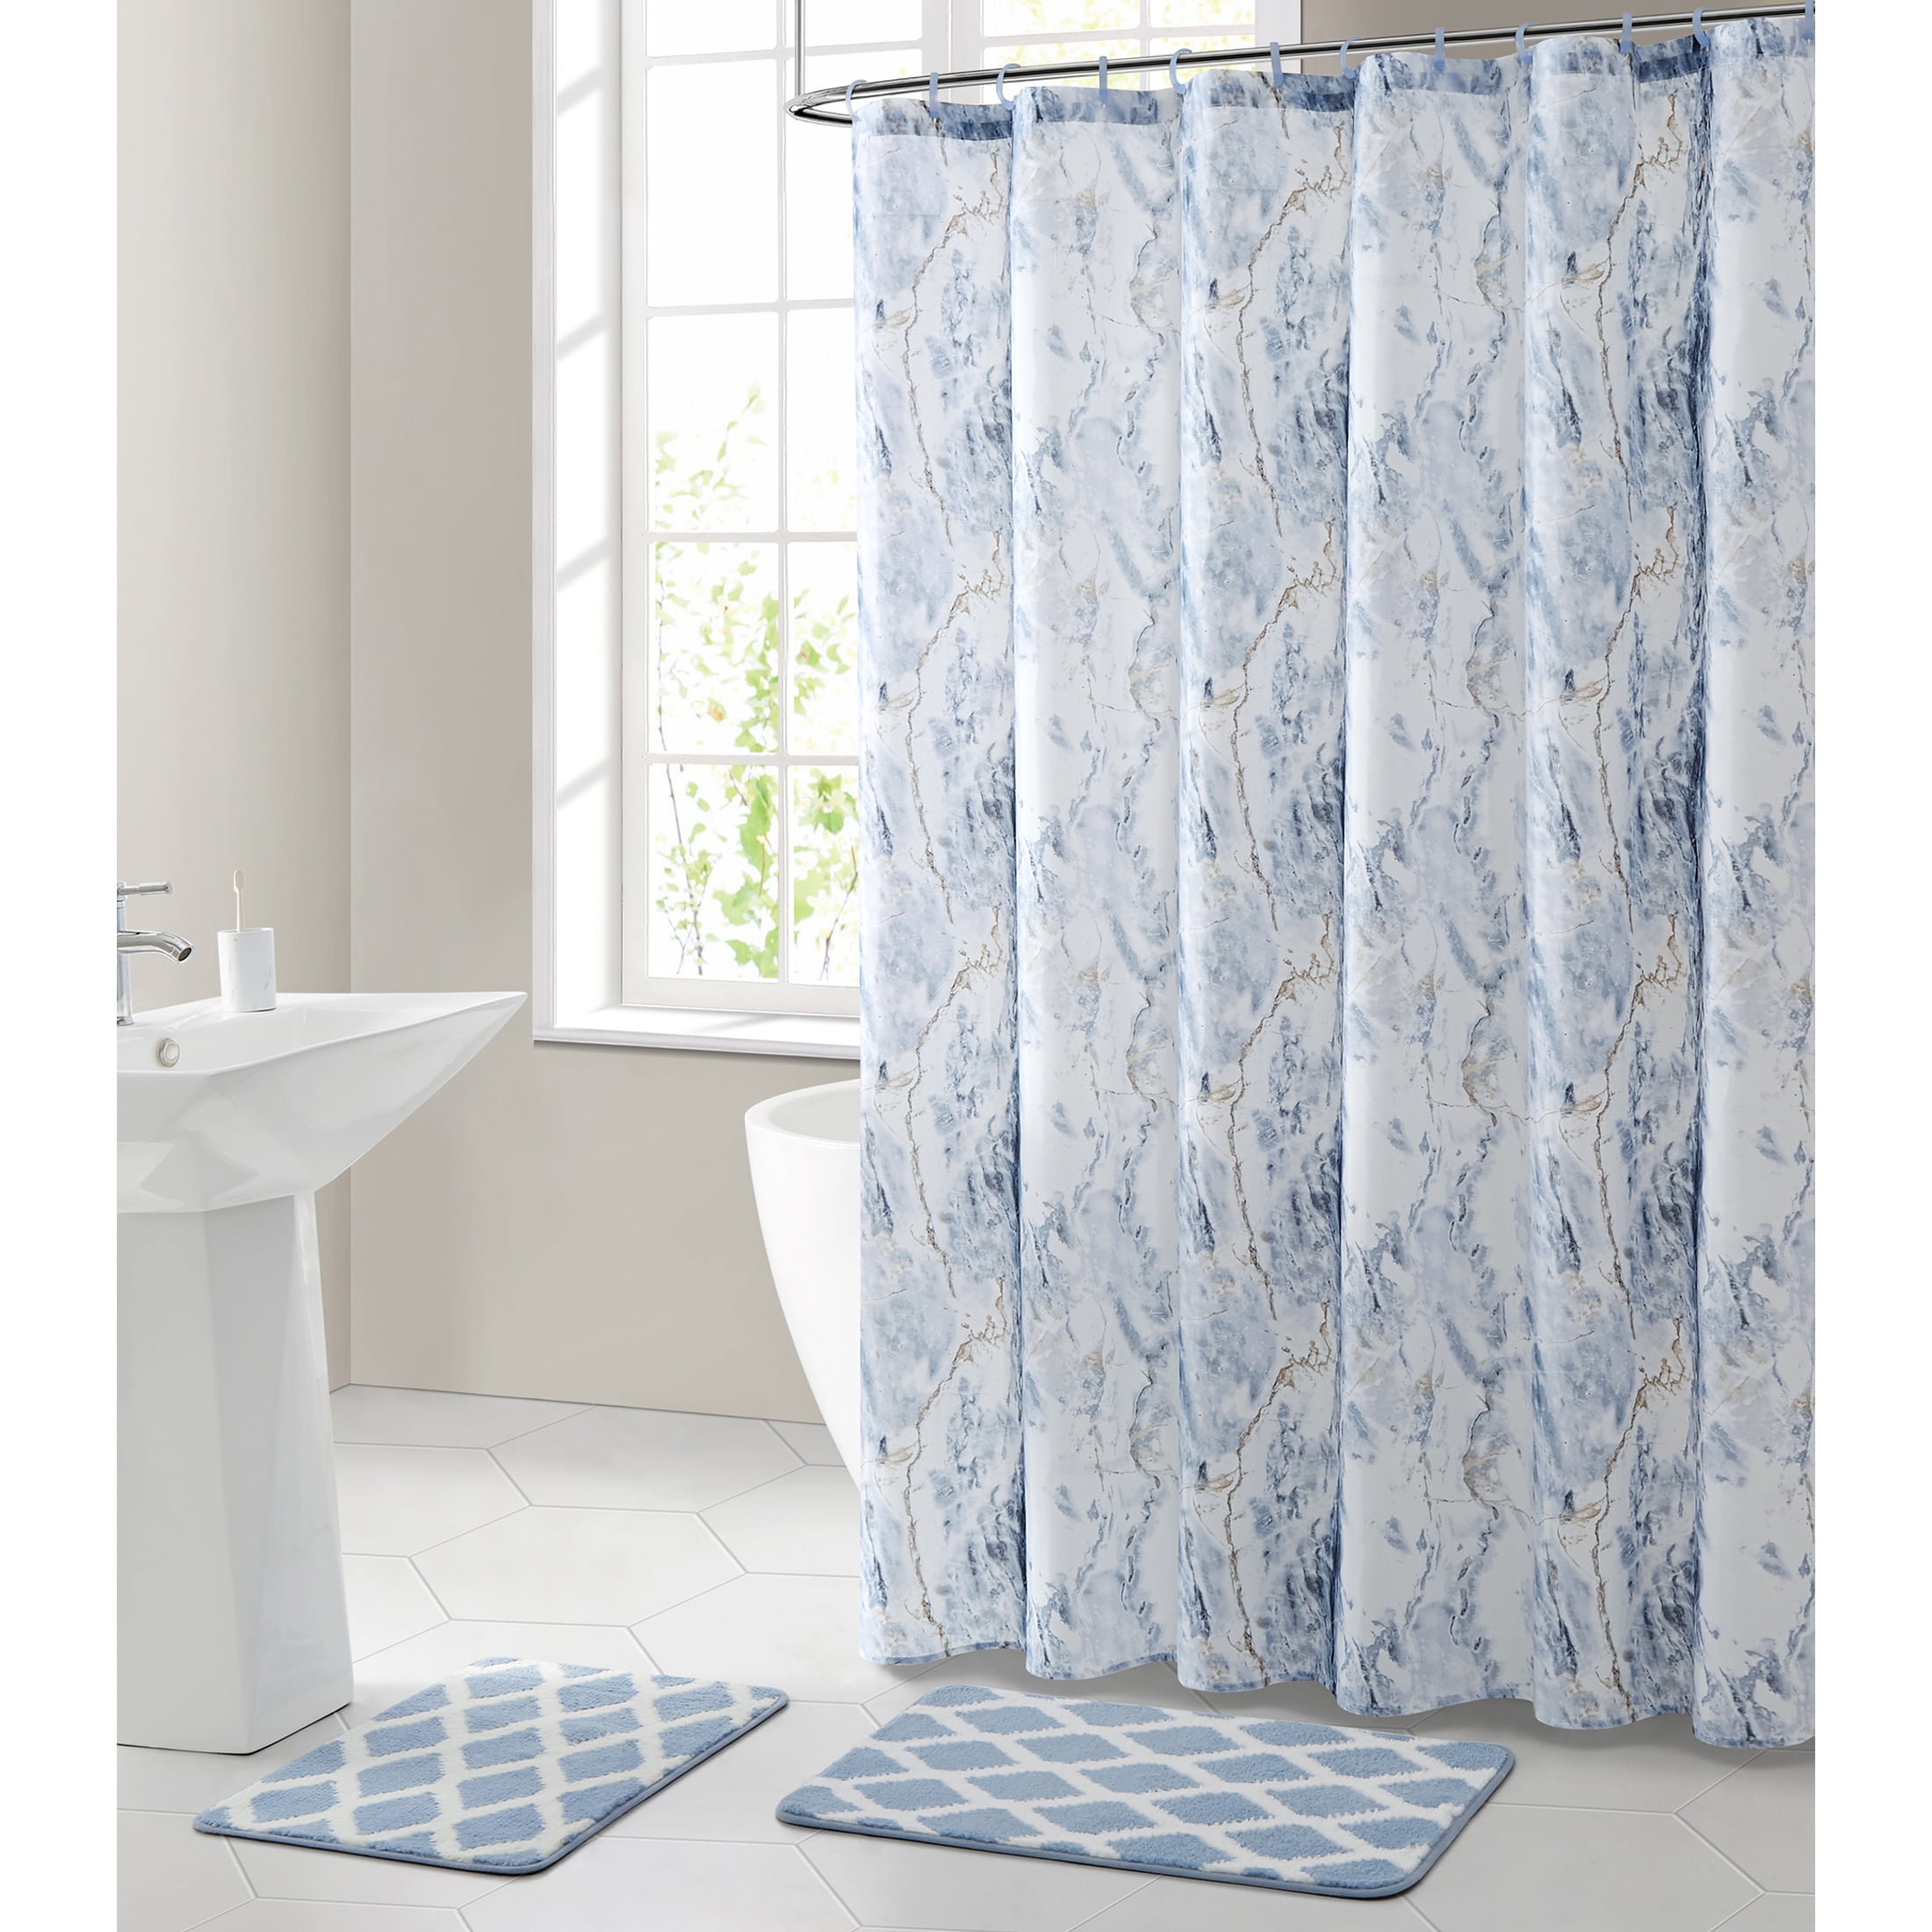 White Daisy Flowers Shower Curtain Blue Background Bathroom Accessory Sets 